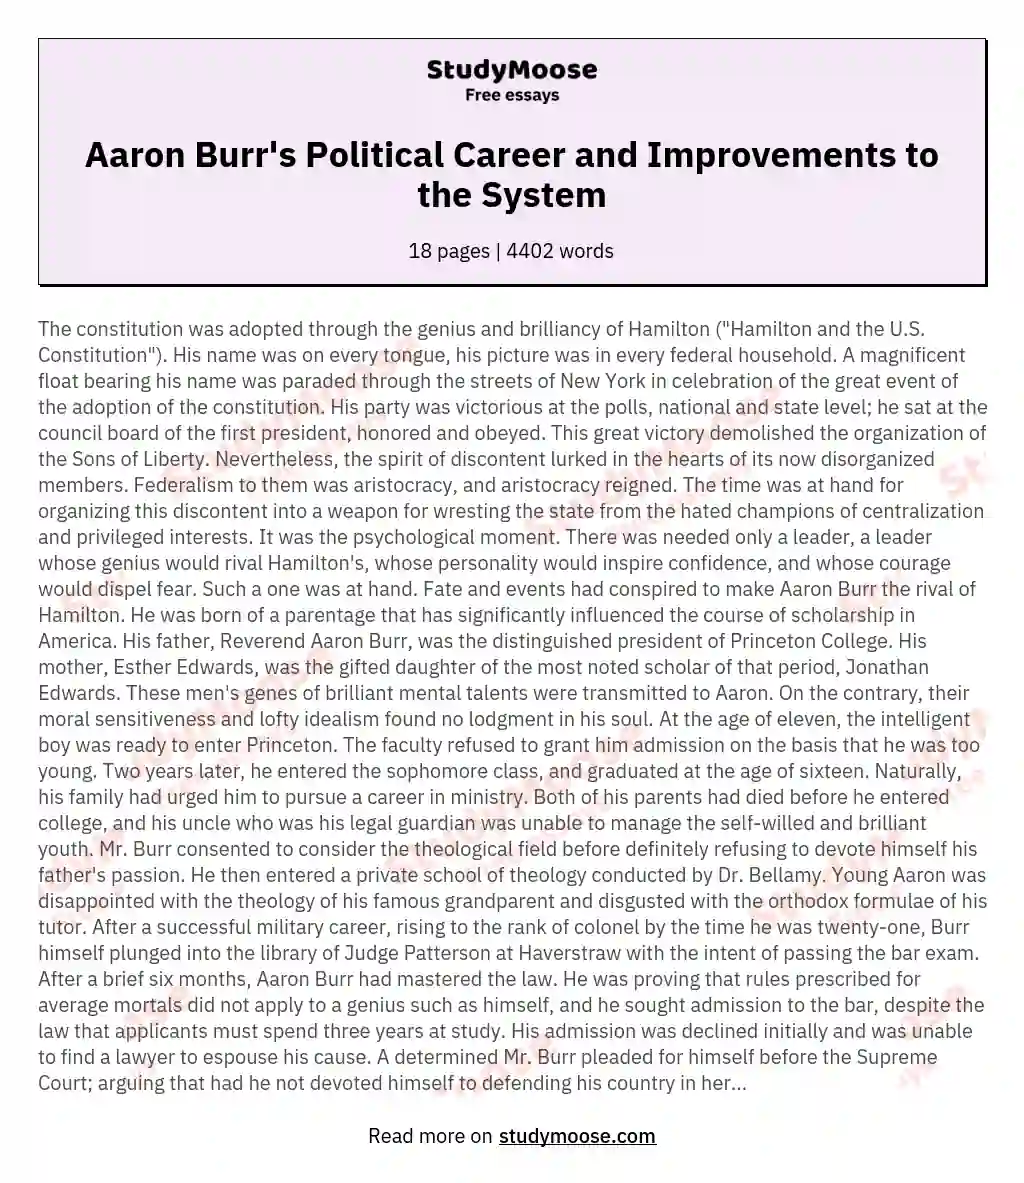 Aaron Burr's Political Career and Improvements to the System essay